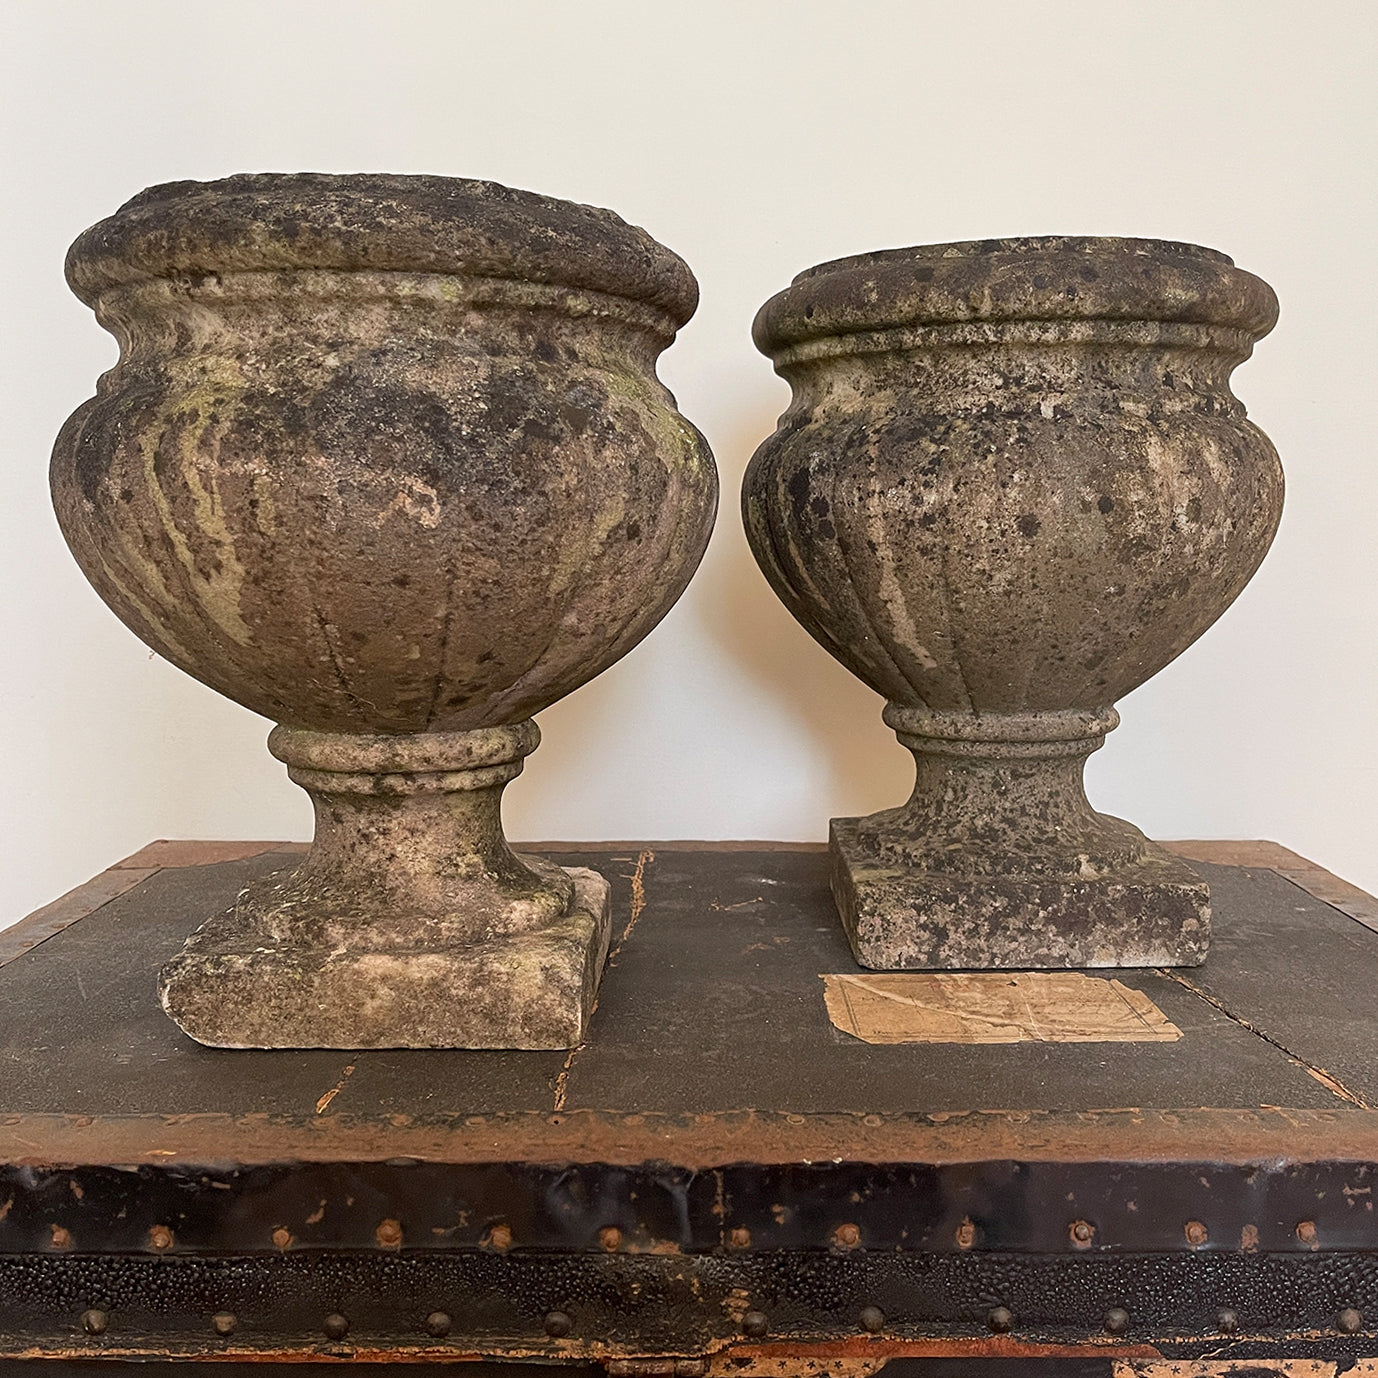 A pair of 19th century marble garden urns of classical form with a good covering of lichen. Crafted with classic proportions and shape. Both have& drainage holes. These can be used in the garden or as planters. Equally as decorative in an interior setting. Dating to c.1880 - SHOP NOW - www.intovintage.co.uk